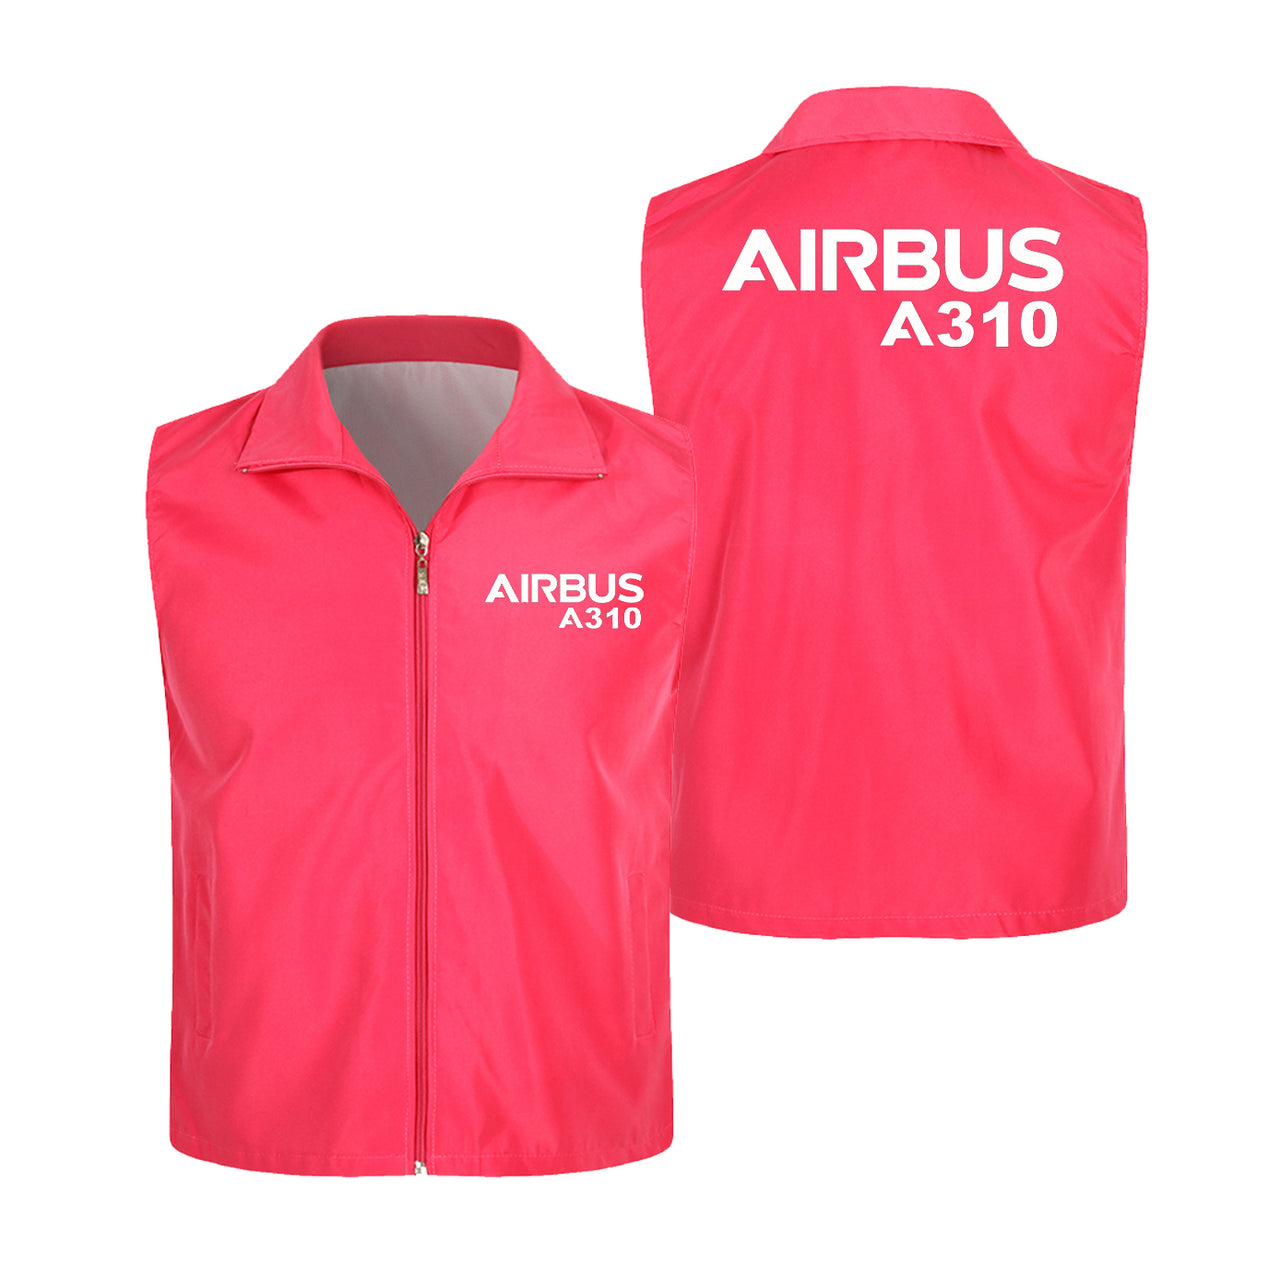 Airbus A310 & Text Designed Thin Style Vests